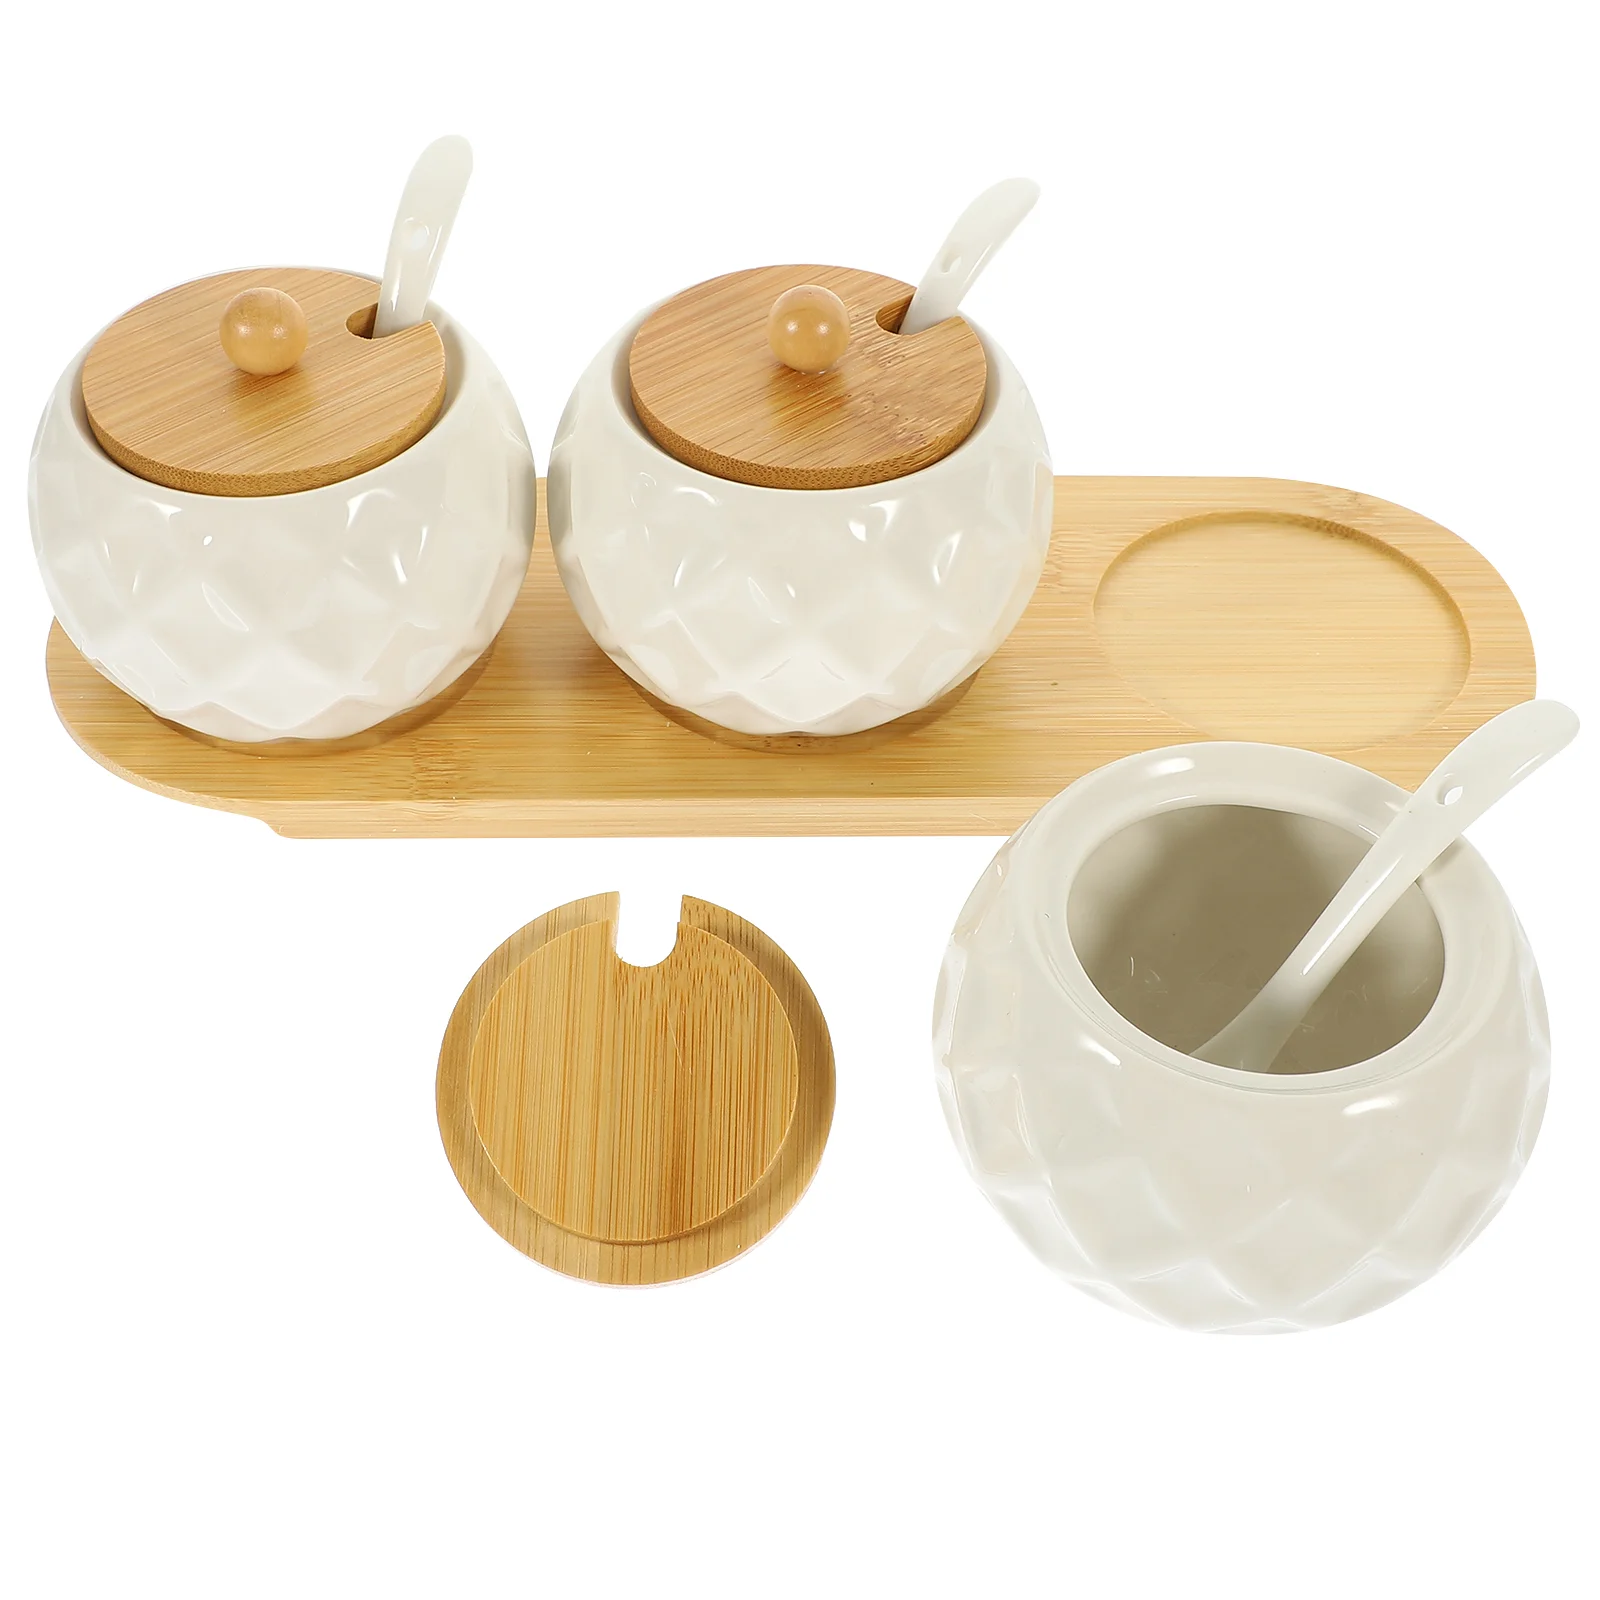 

Set of 3 Kitchen Ceramic Spice Jars with Bamboo Lids Barbecue Seasoning Condiment Container Storage for Holder Salt Shaker